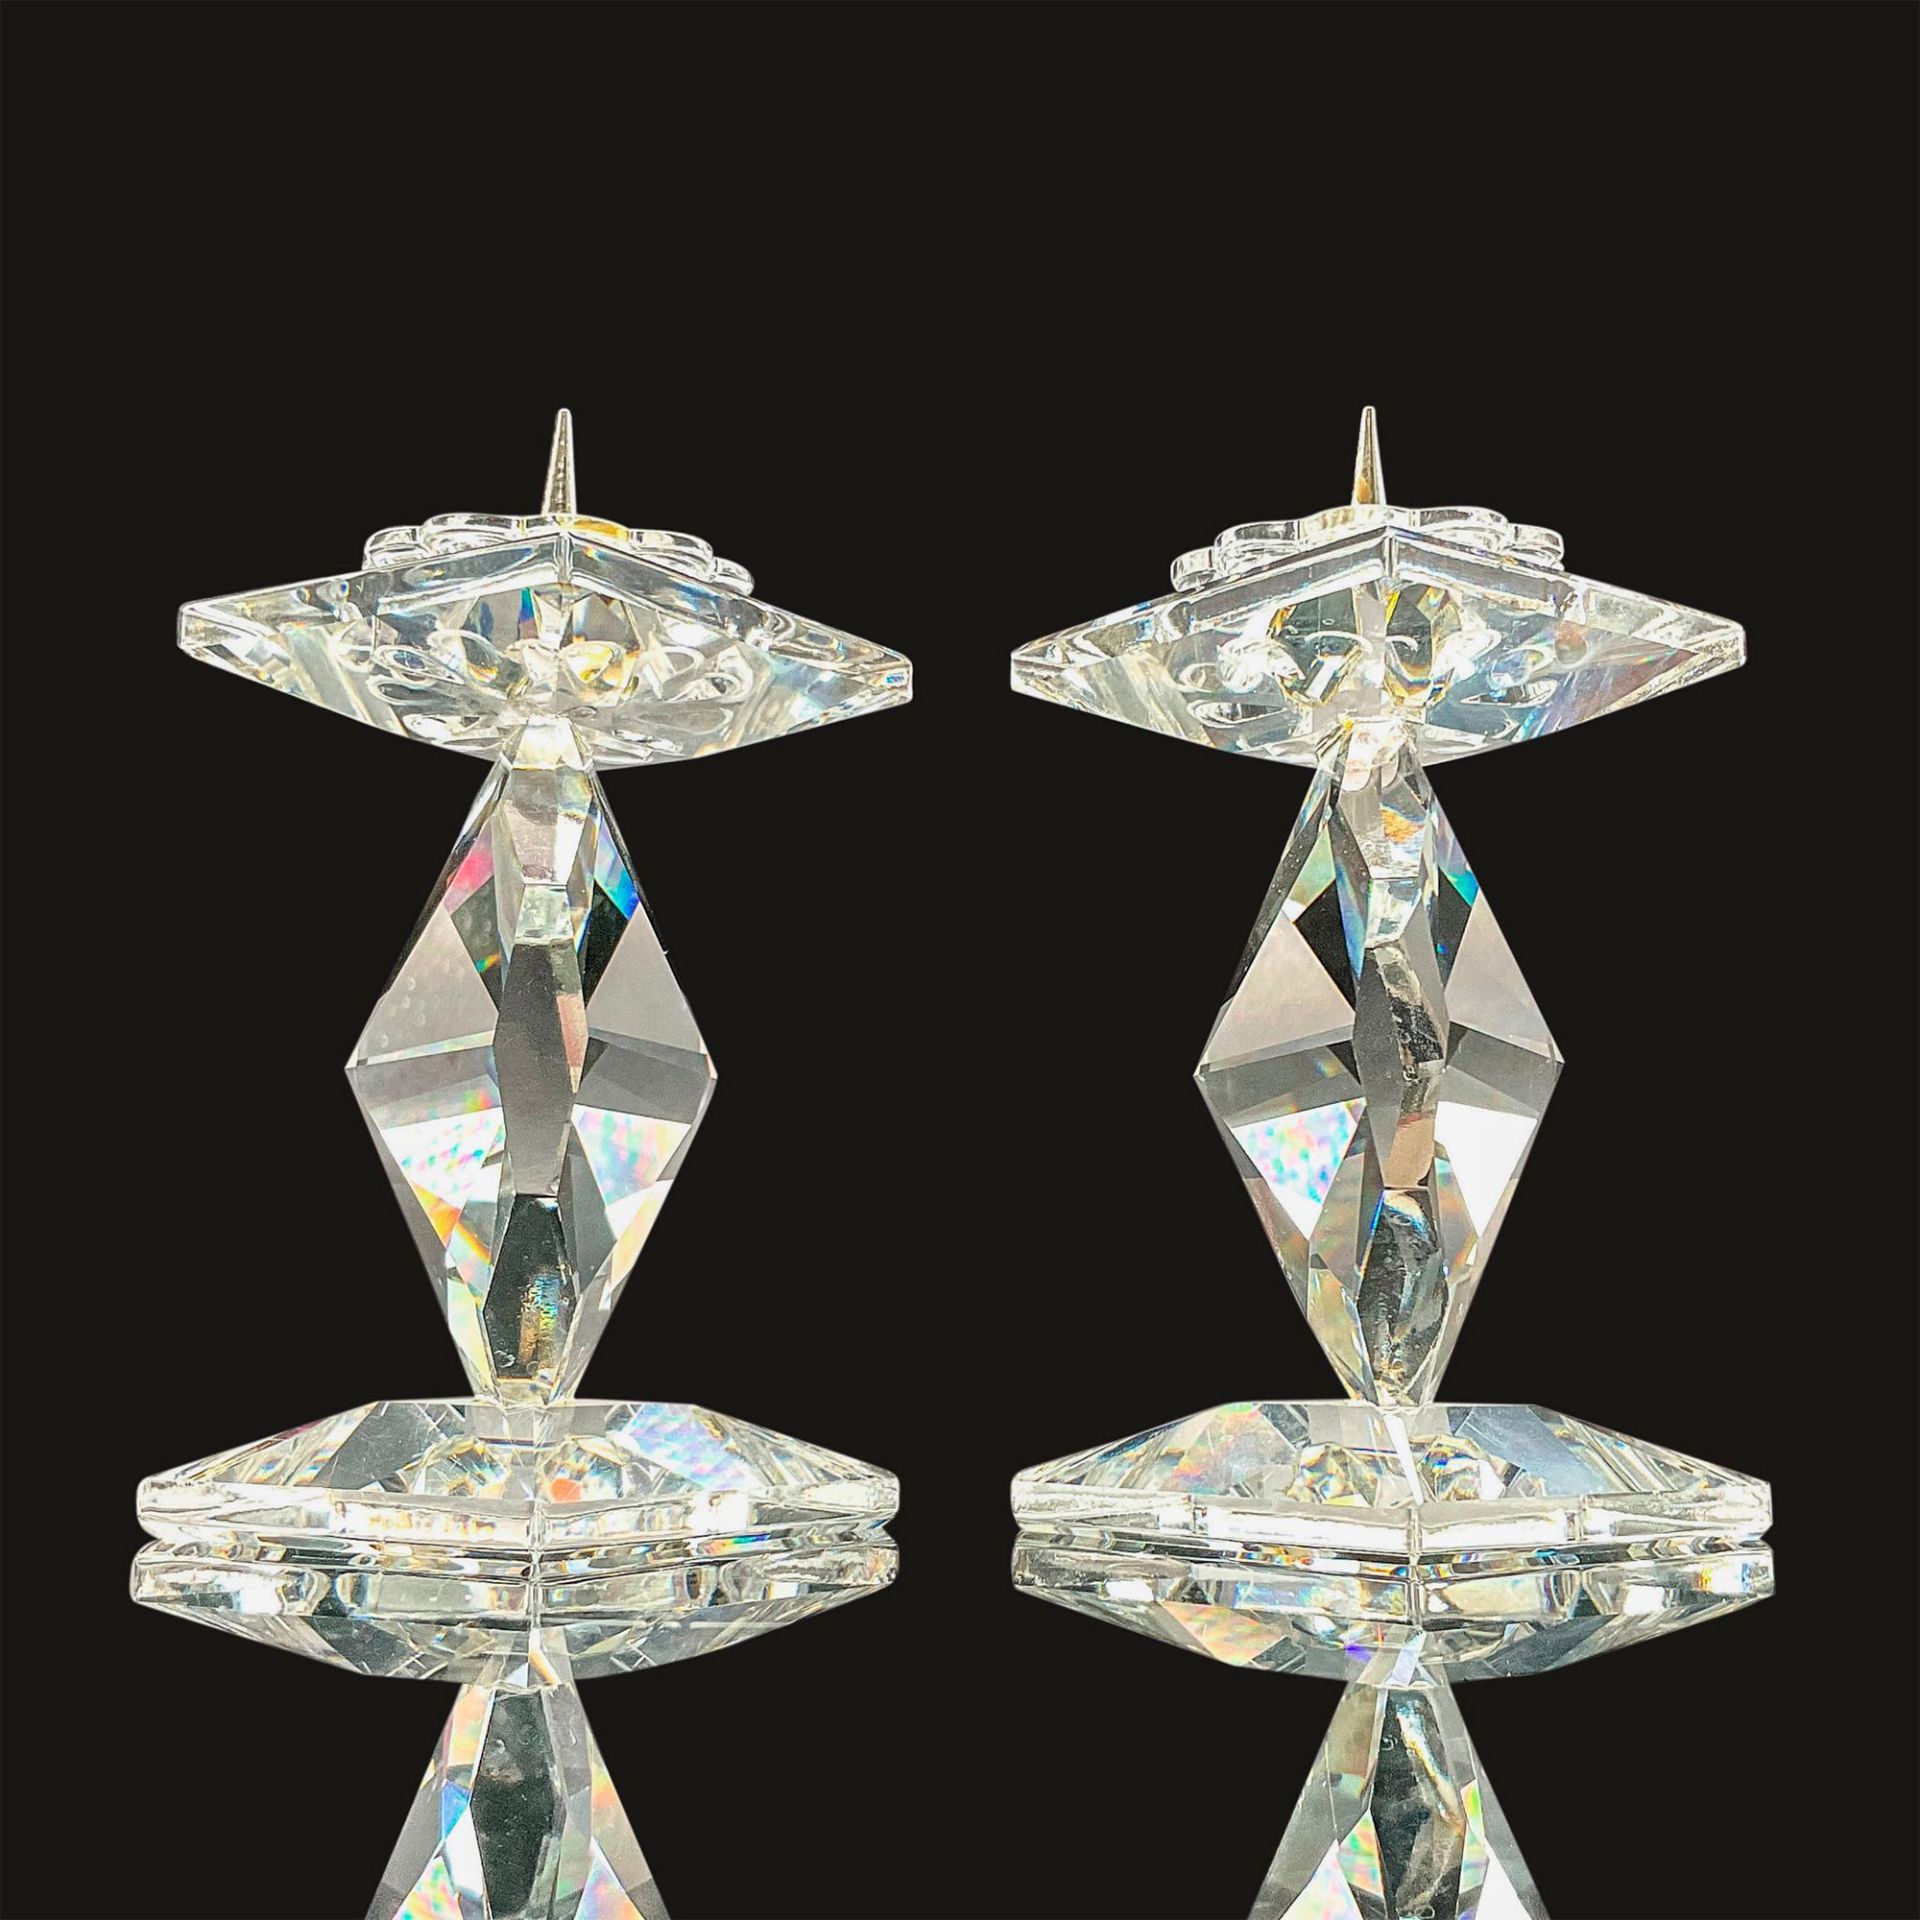 2pc Swarovski Style Faceted Crystal Candle Holders - Image 2 of 4